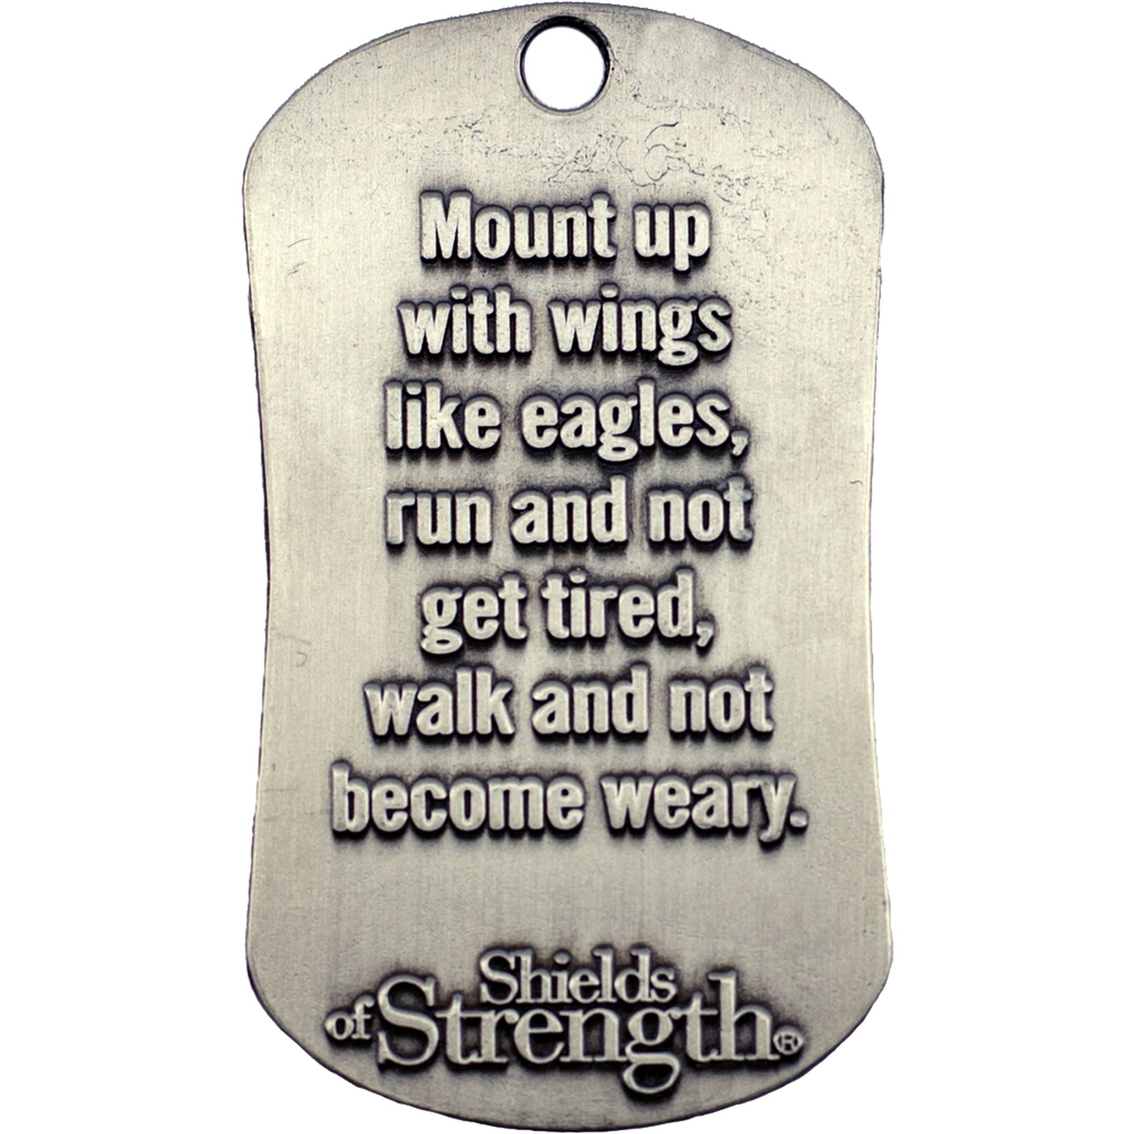 Shields of Strength Air Force Mom Antique Finish Dog Tag Necklace, Isaiah 40:31 - Image 2 of 2